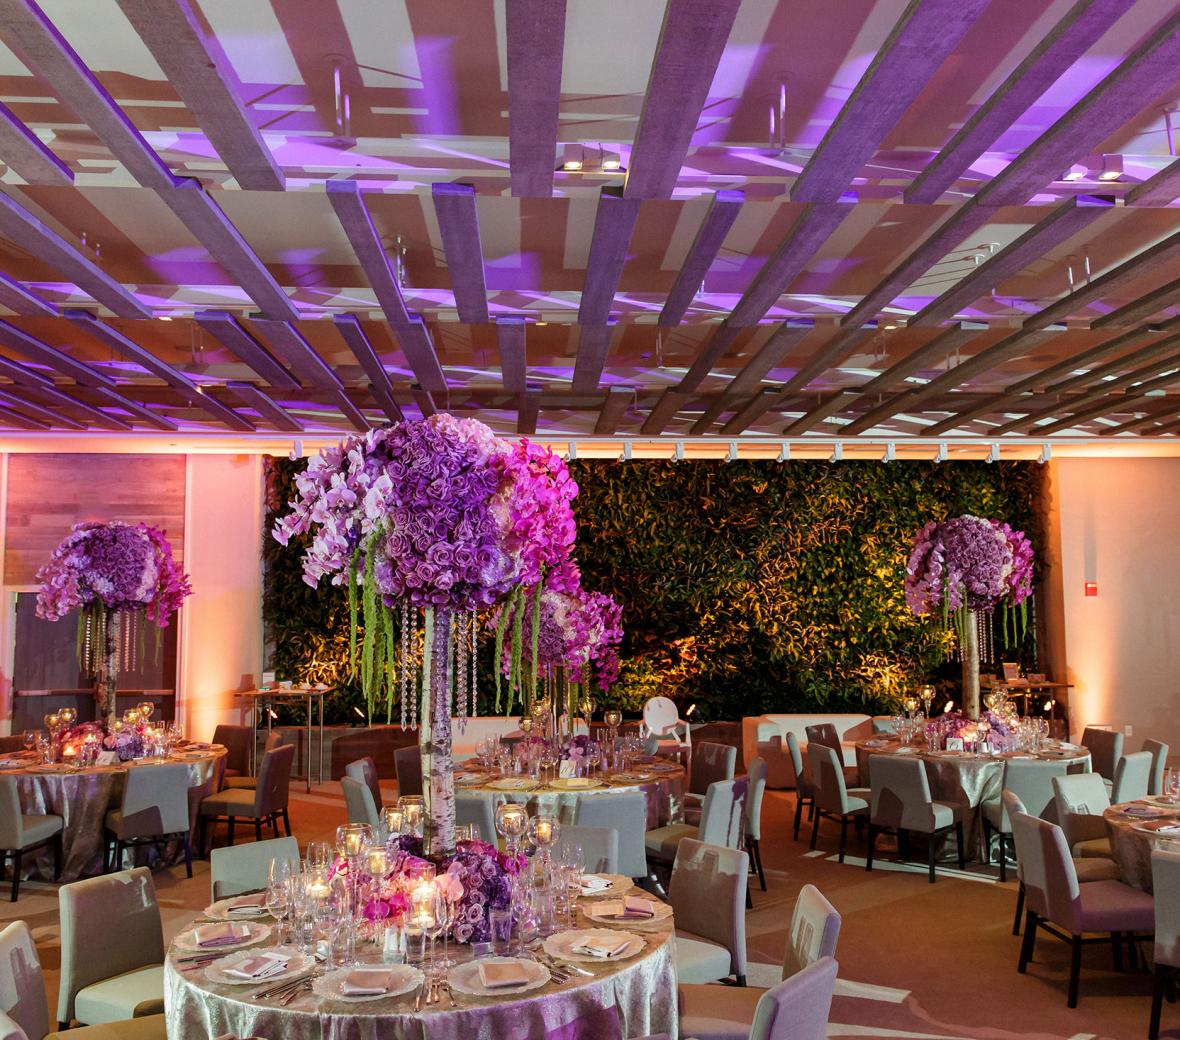 Wedding ballroom with floral arrangements on tables and pink and purple mood lighting